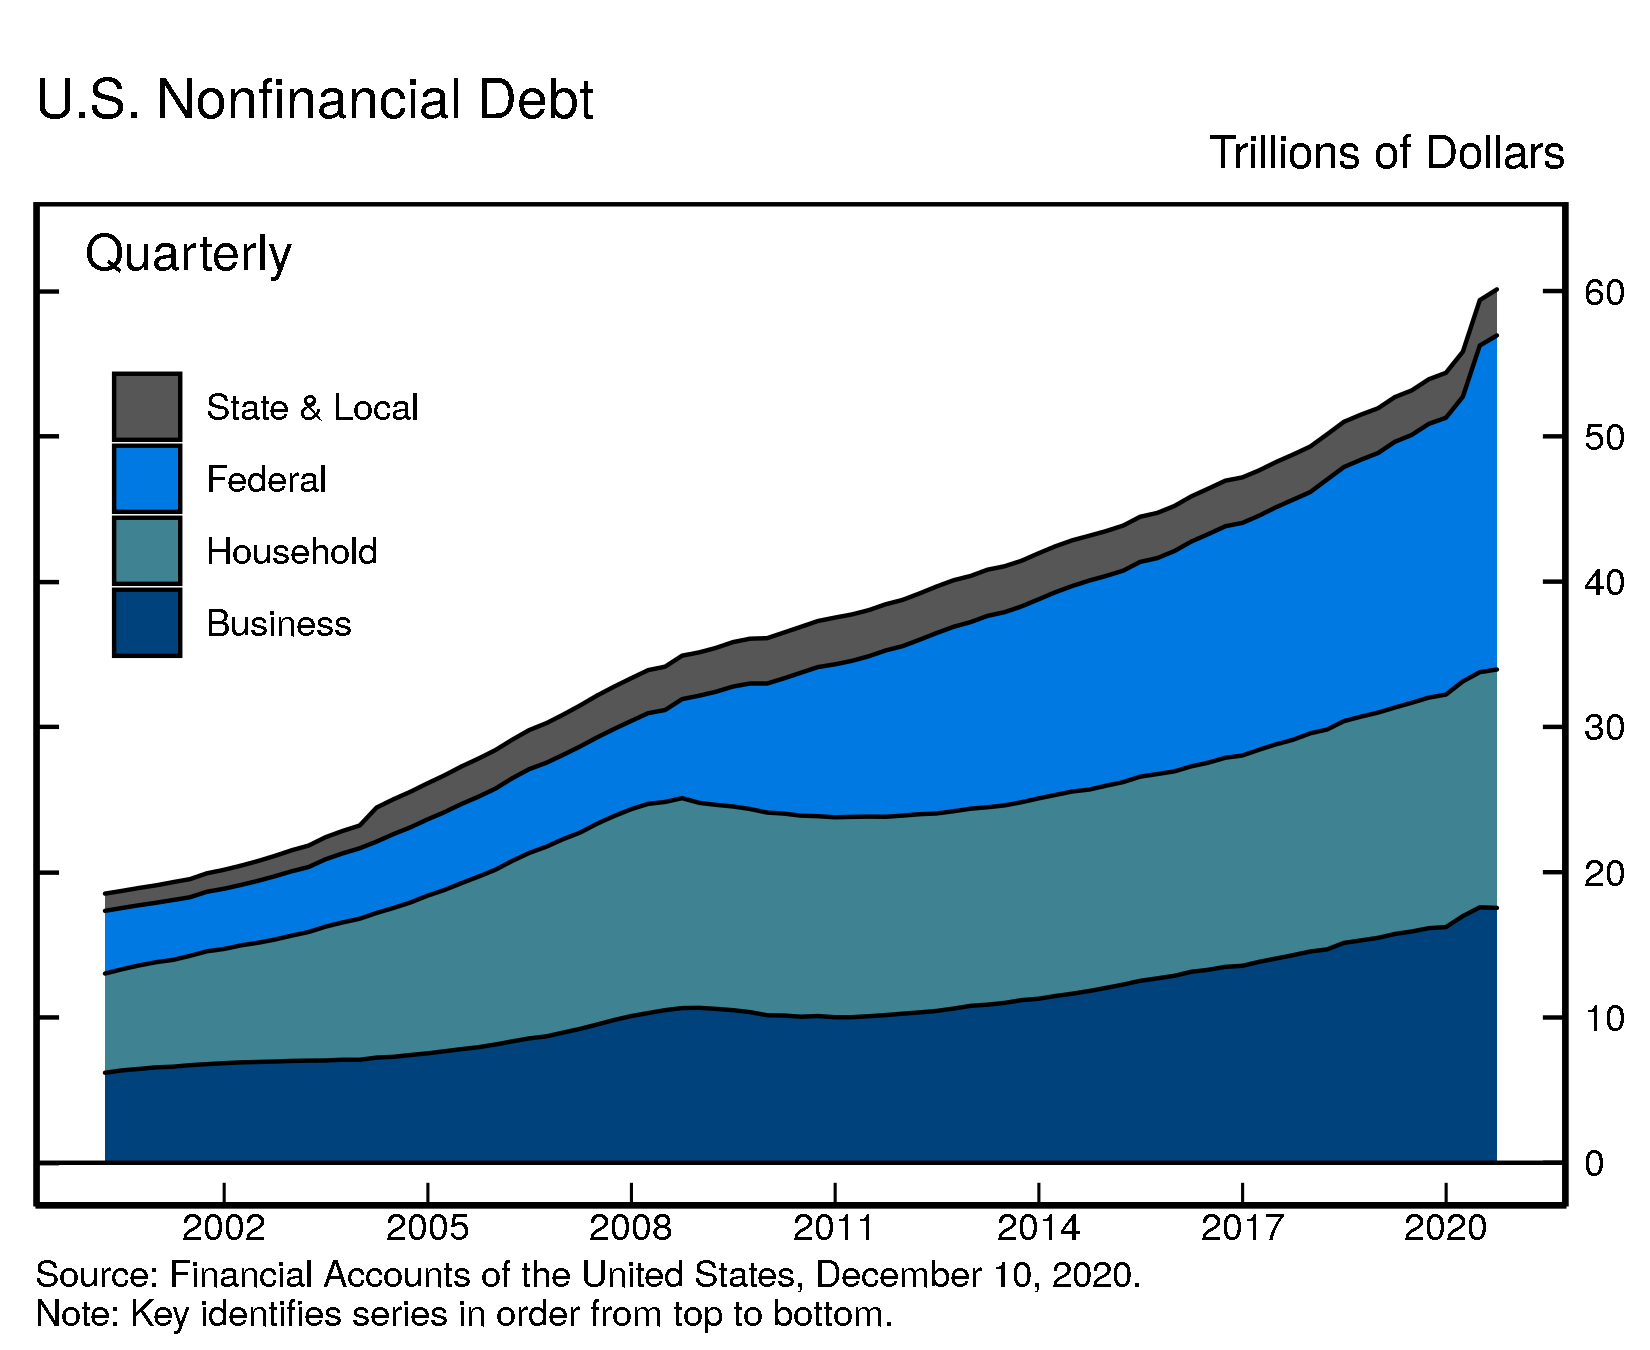 A stacked area chart showing total debt of US nonfinancial sectors over time, with separate areas for component sectors. Time is plotted along the horizontal axis and dollars are plotted on the vertical axis.